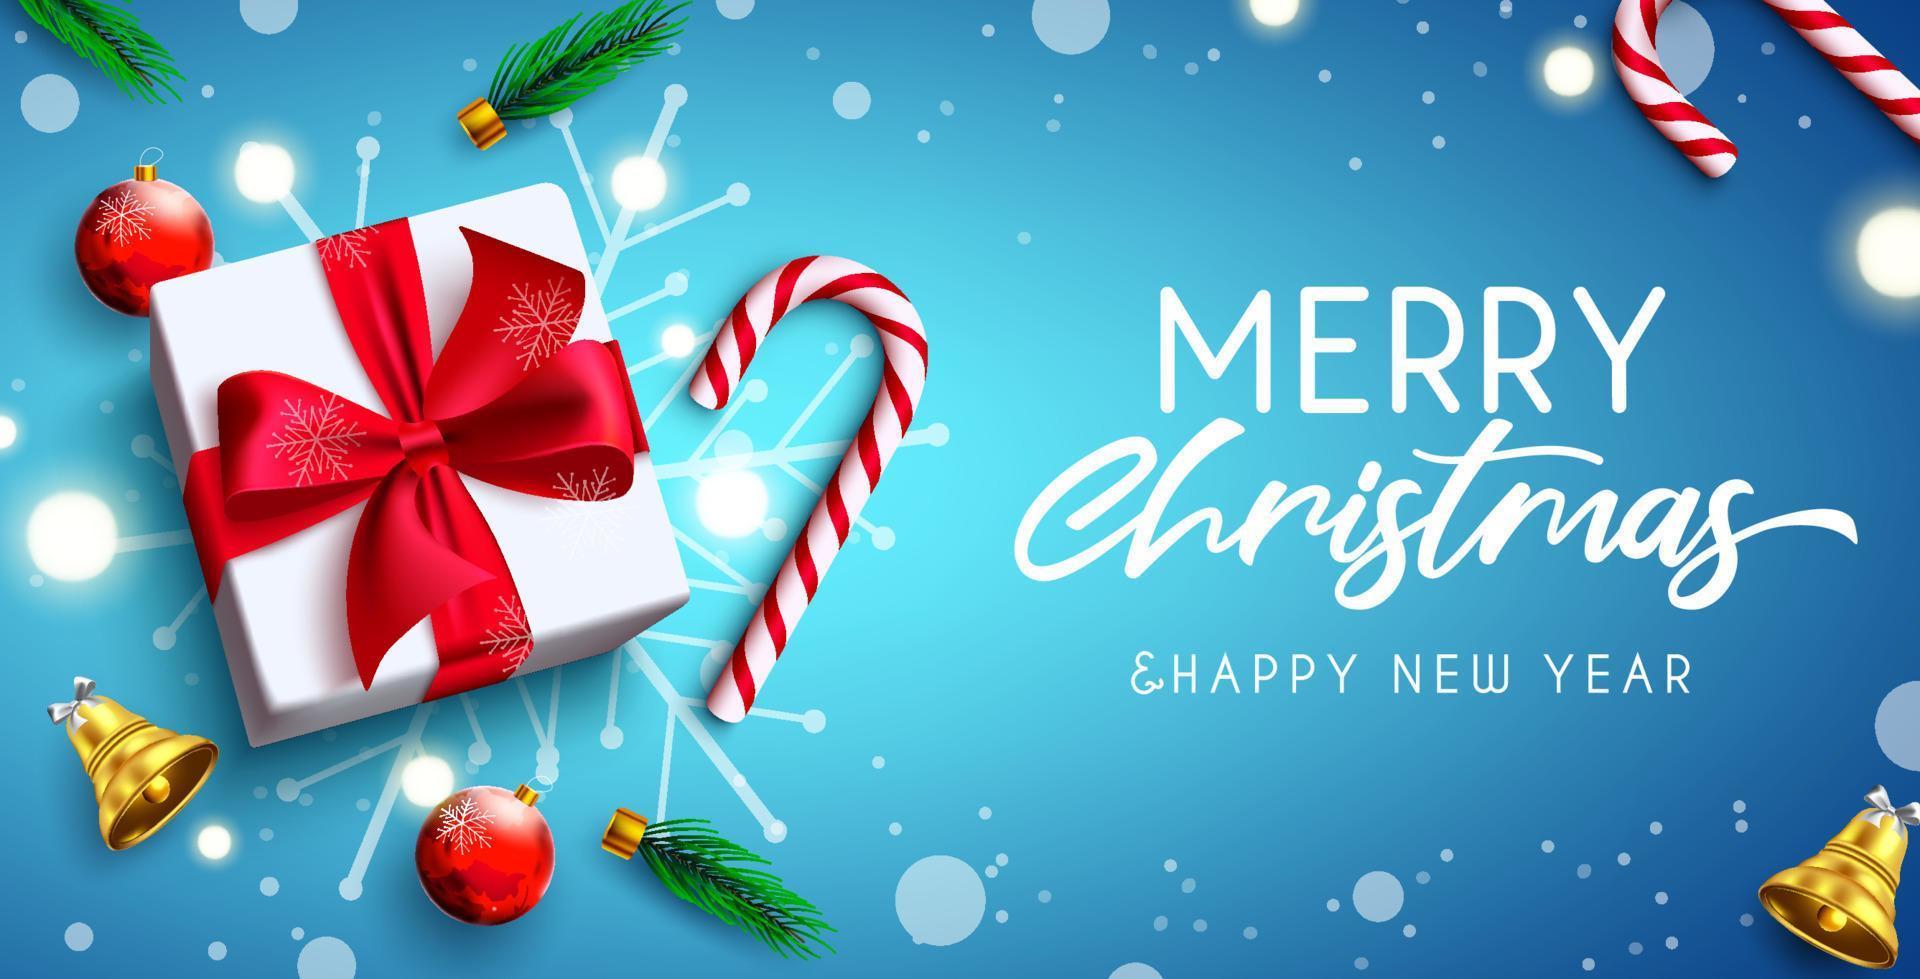 Merry christmas vector background design. Merry christmas text in blue space with gift, candy cane and bokeh lights xmas elements for holiday season greeting card. Vector illustration.